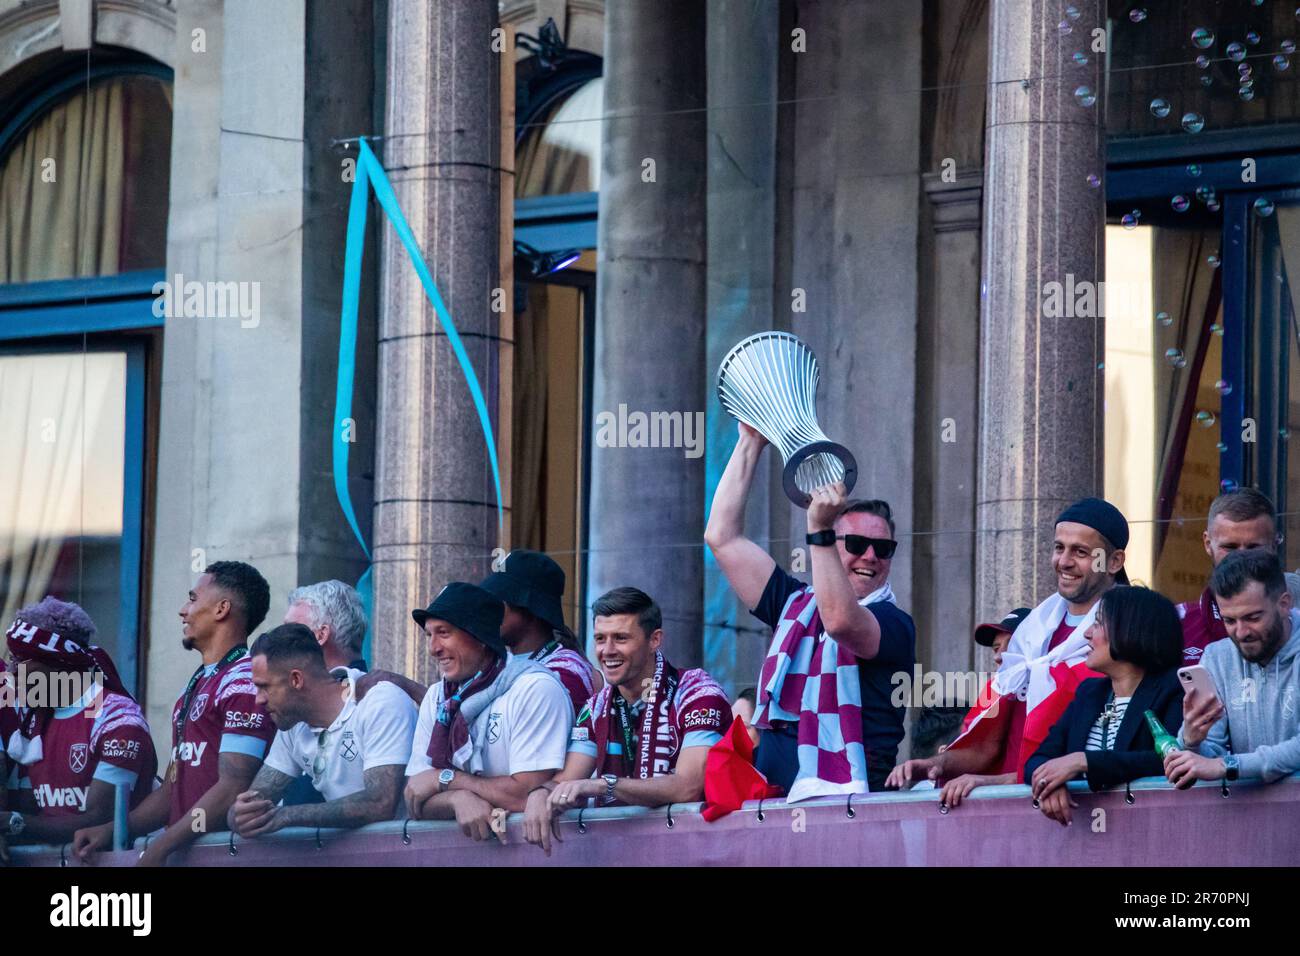 London, UK. 8th June, 2023. Former West Ham United captain and current first team coach Kevin Nolan celebrates with the UEFA Europa Conference League trophy on the balcony of Stratford Town Hall alongside members of the squad following a victory parade from the site of the club's former Boleyn Ground stadium in Upton Park. West Ham defeated ACF Fiorentina in the UEFA Europa Conference League Final on 7 June, winning their first major trophy since 1980. Credit: Mark Kerrison/Alamy Live News Stock Photo